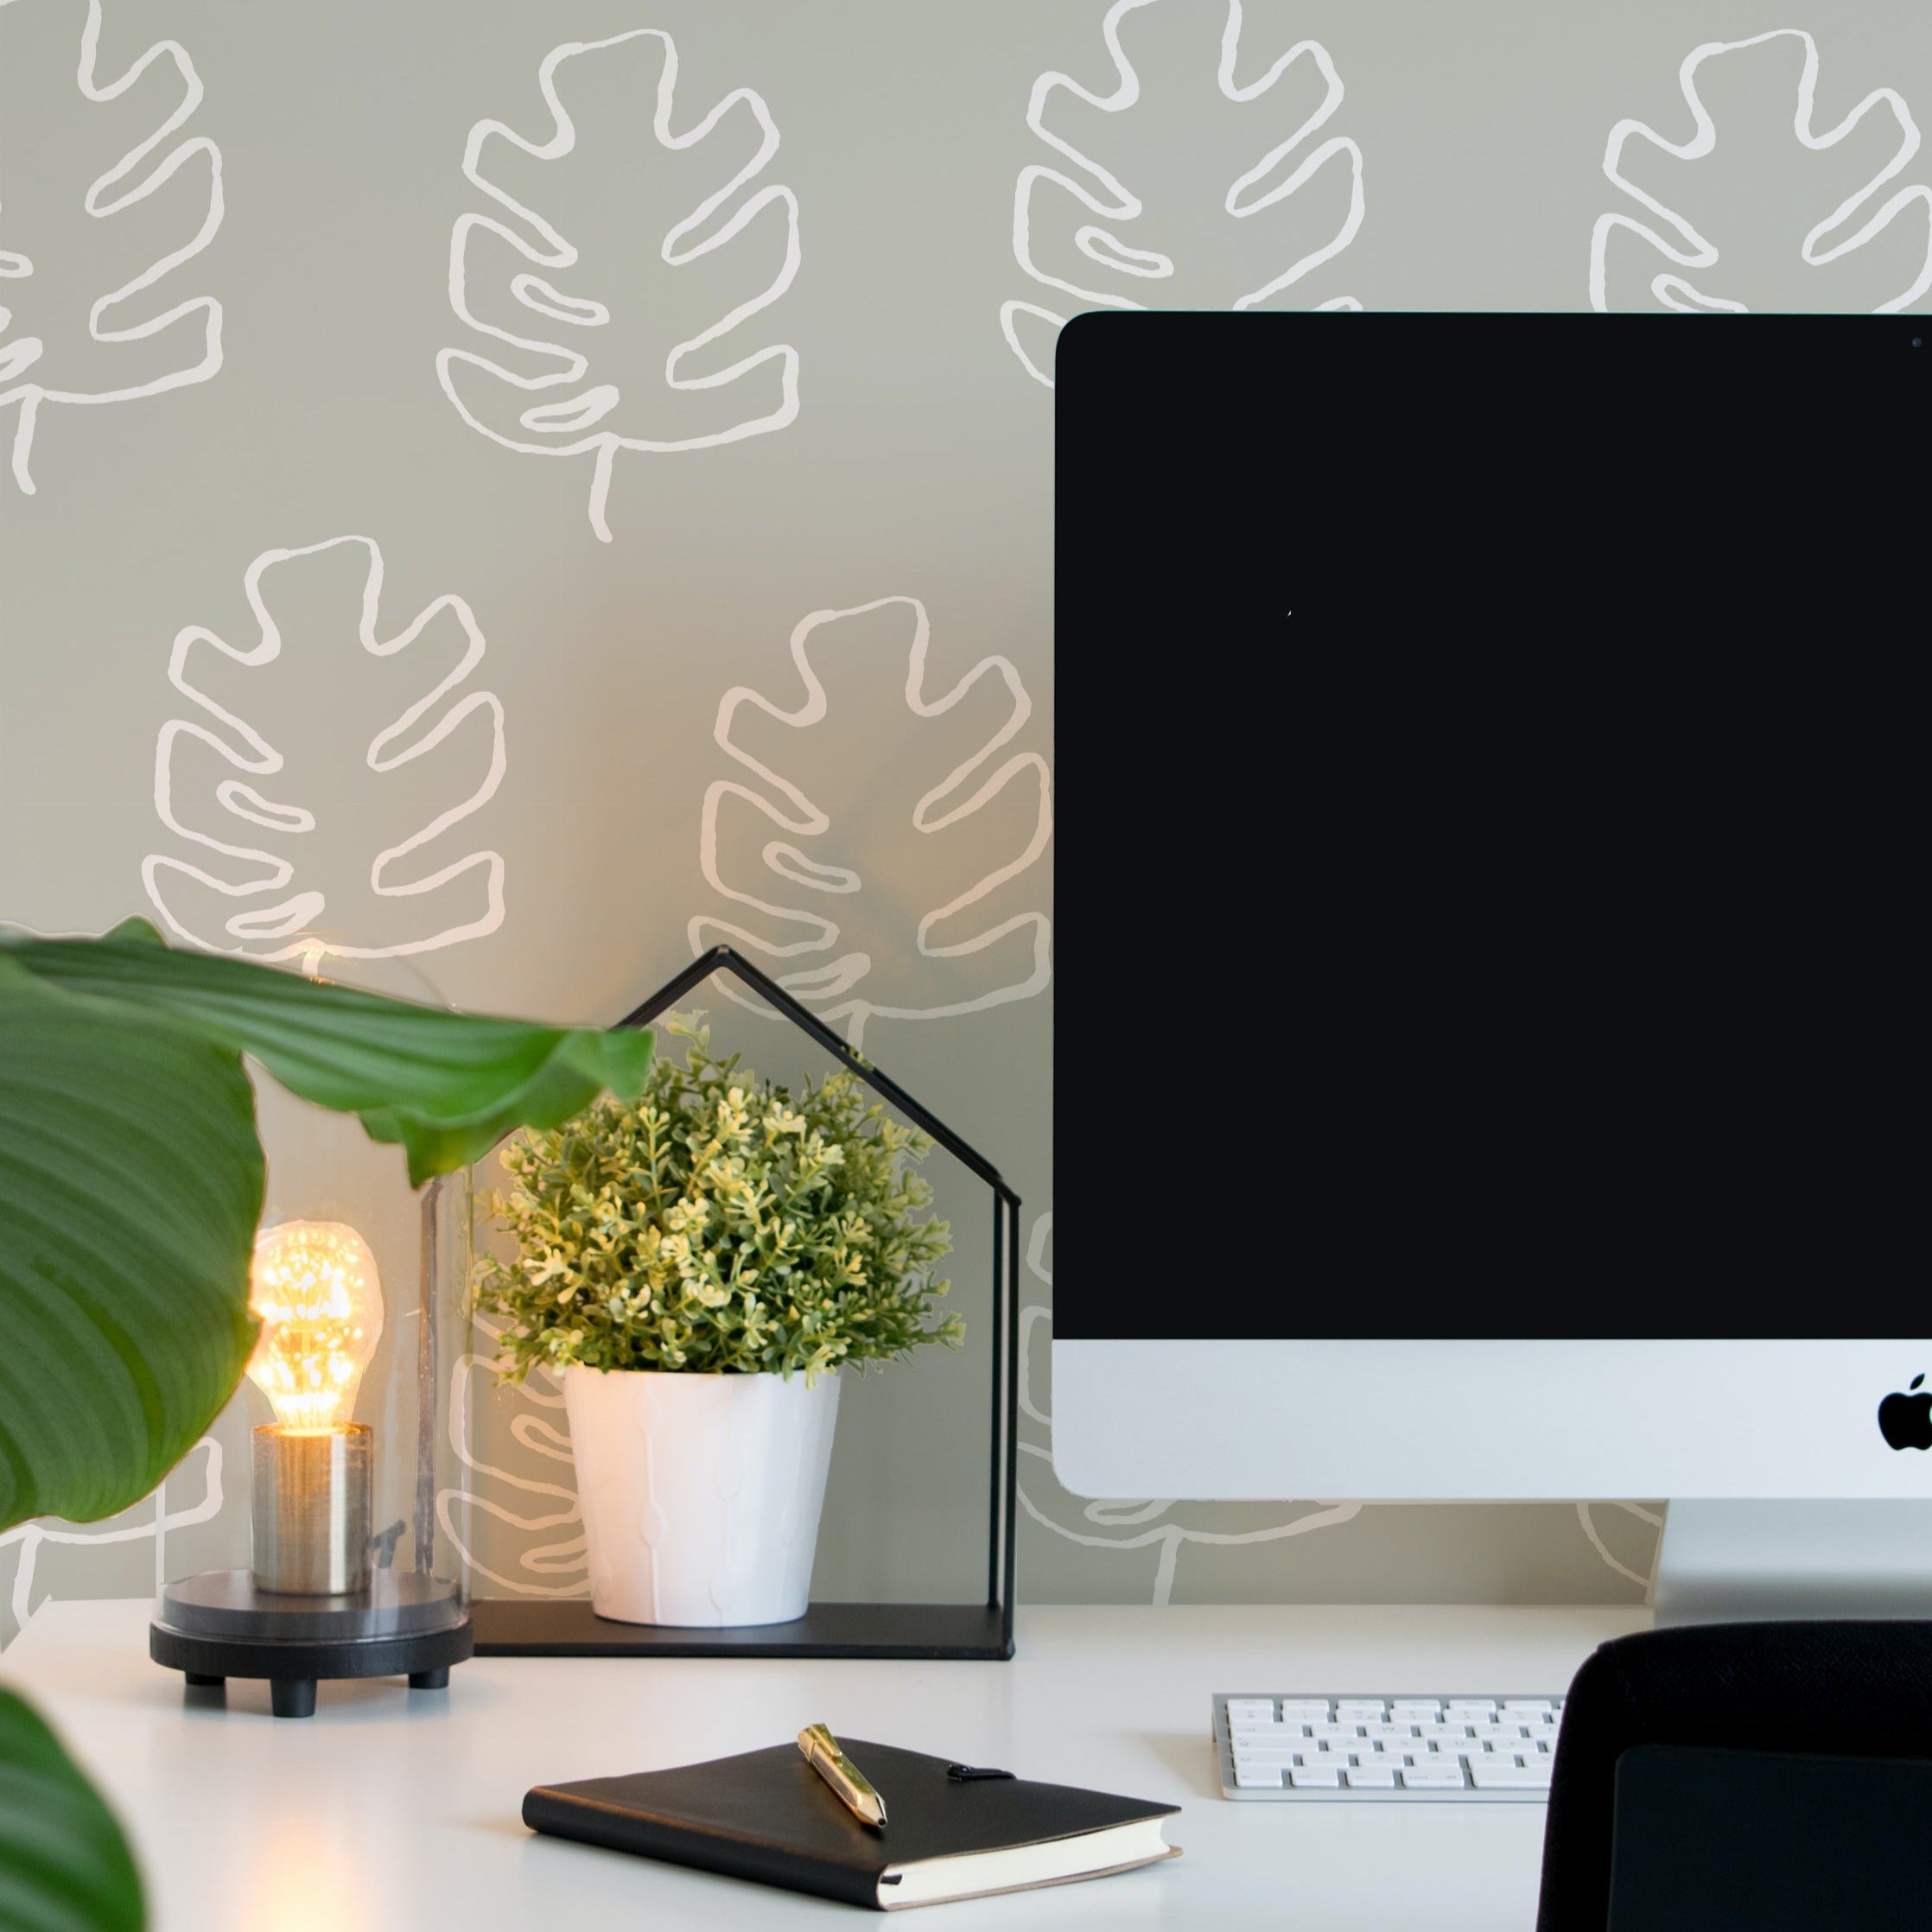 A stylish home office setup enhanced by the Palm Leaves Wallpaper, featuring a simple and elegant white palm leaf design on a grey backdrop. The wallpaper adds a touch of nature-inspired tranquility to the space, complemented by a modern desk and ambient lighting.